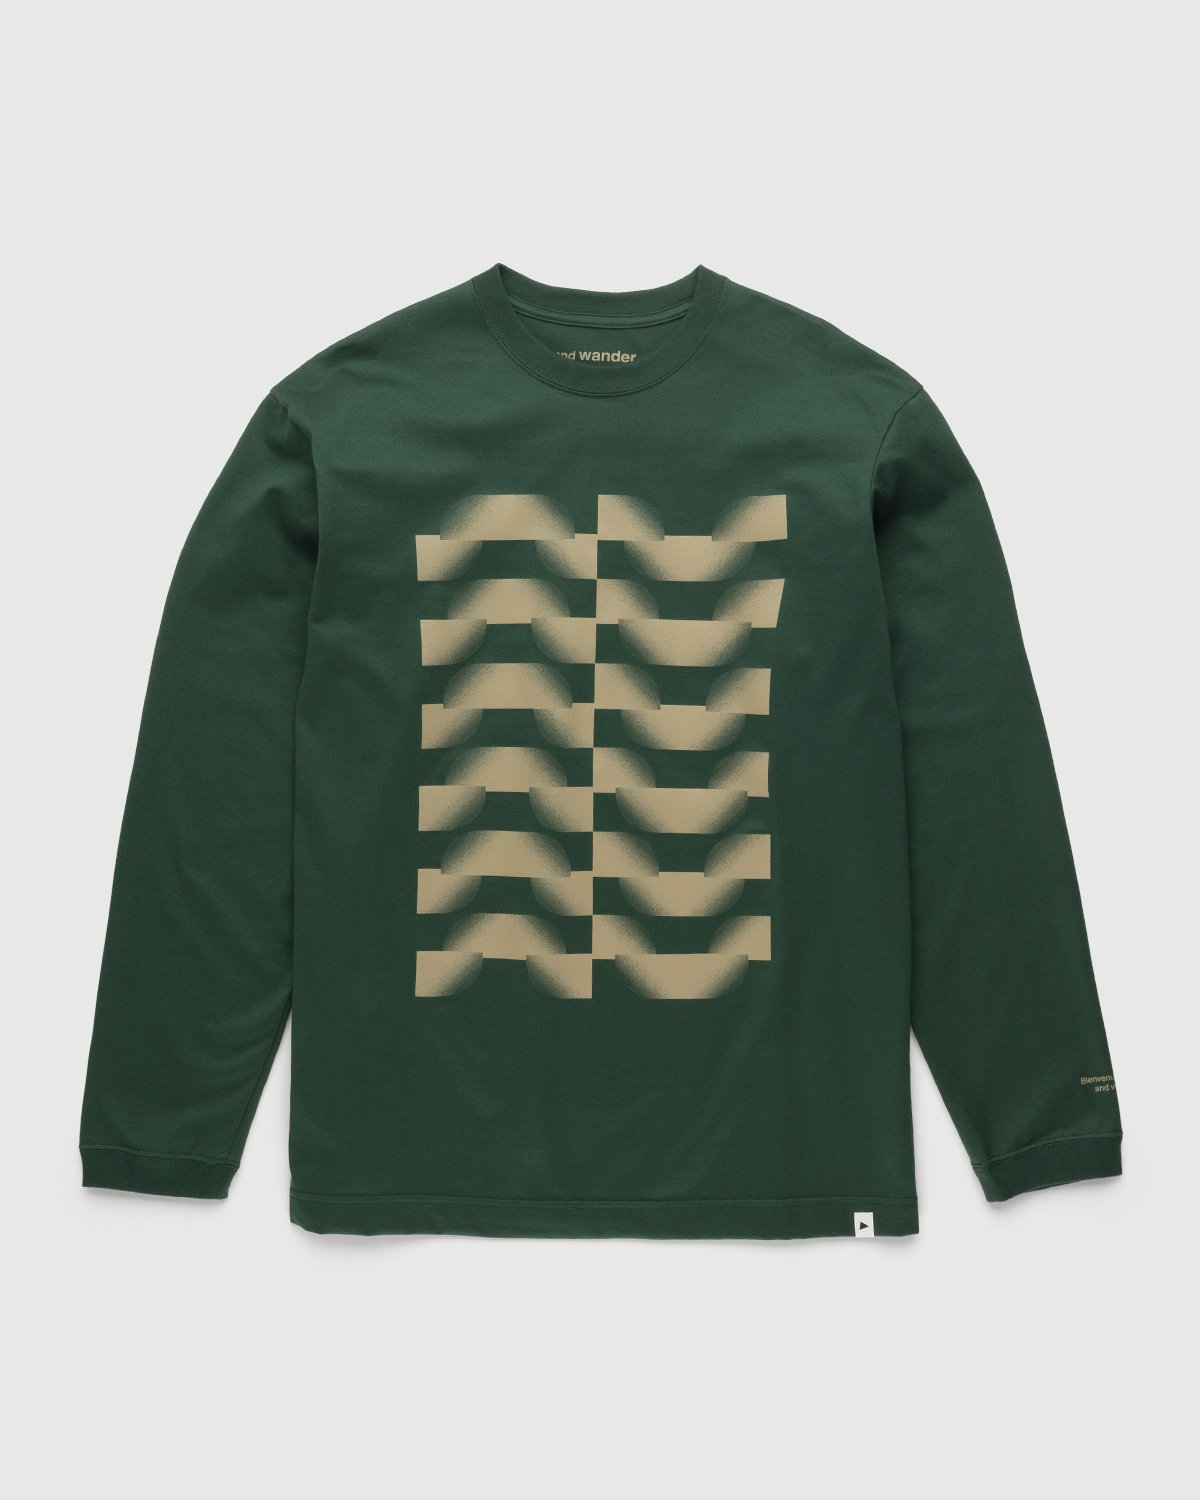 And Wander – Up Down Graphic LS Tee Green | Highsnobiety Shop